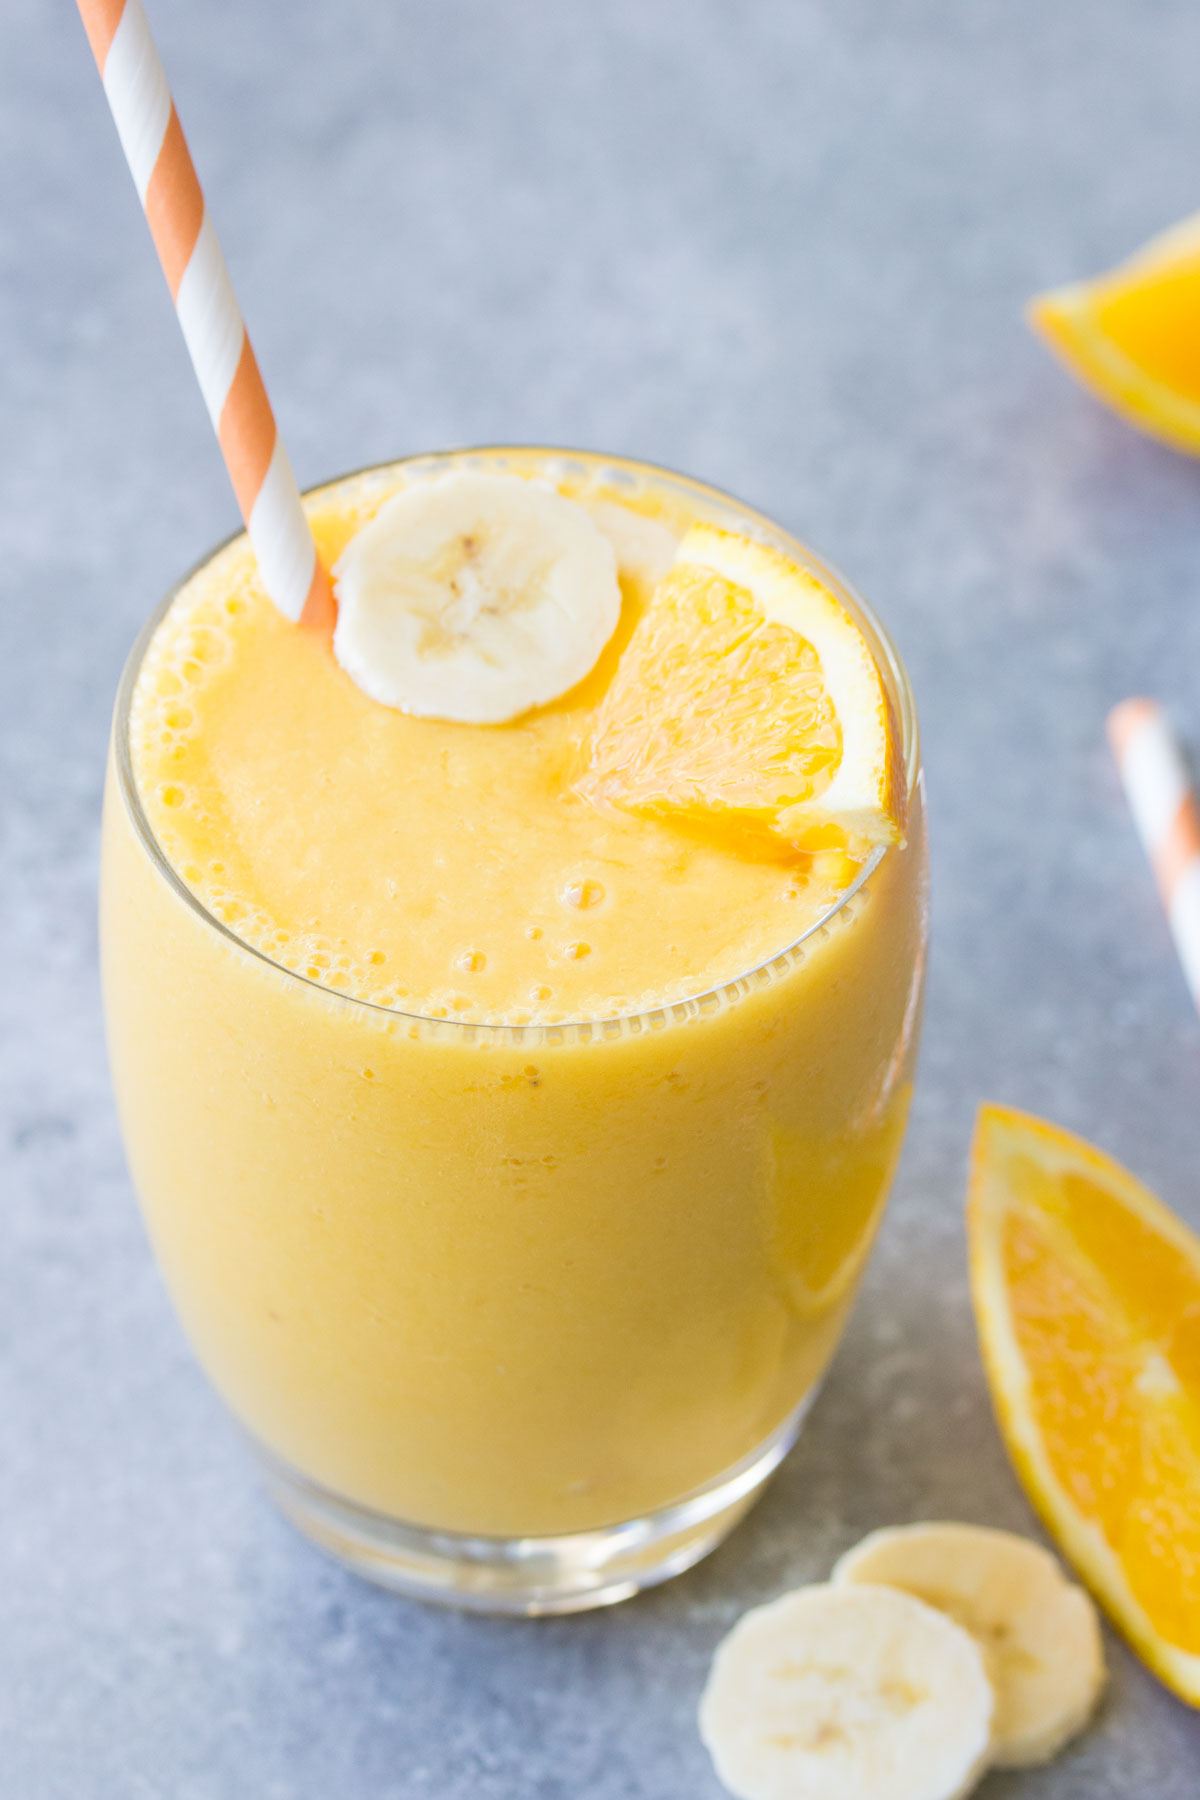 Orange smoothie in a glass with a straw, with banana slice and orange wedge.